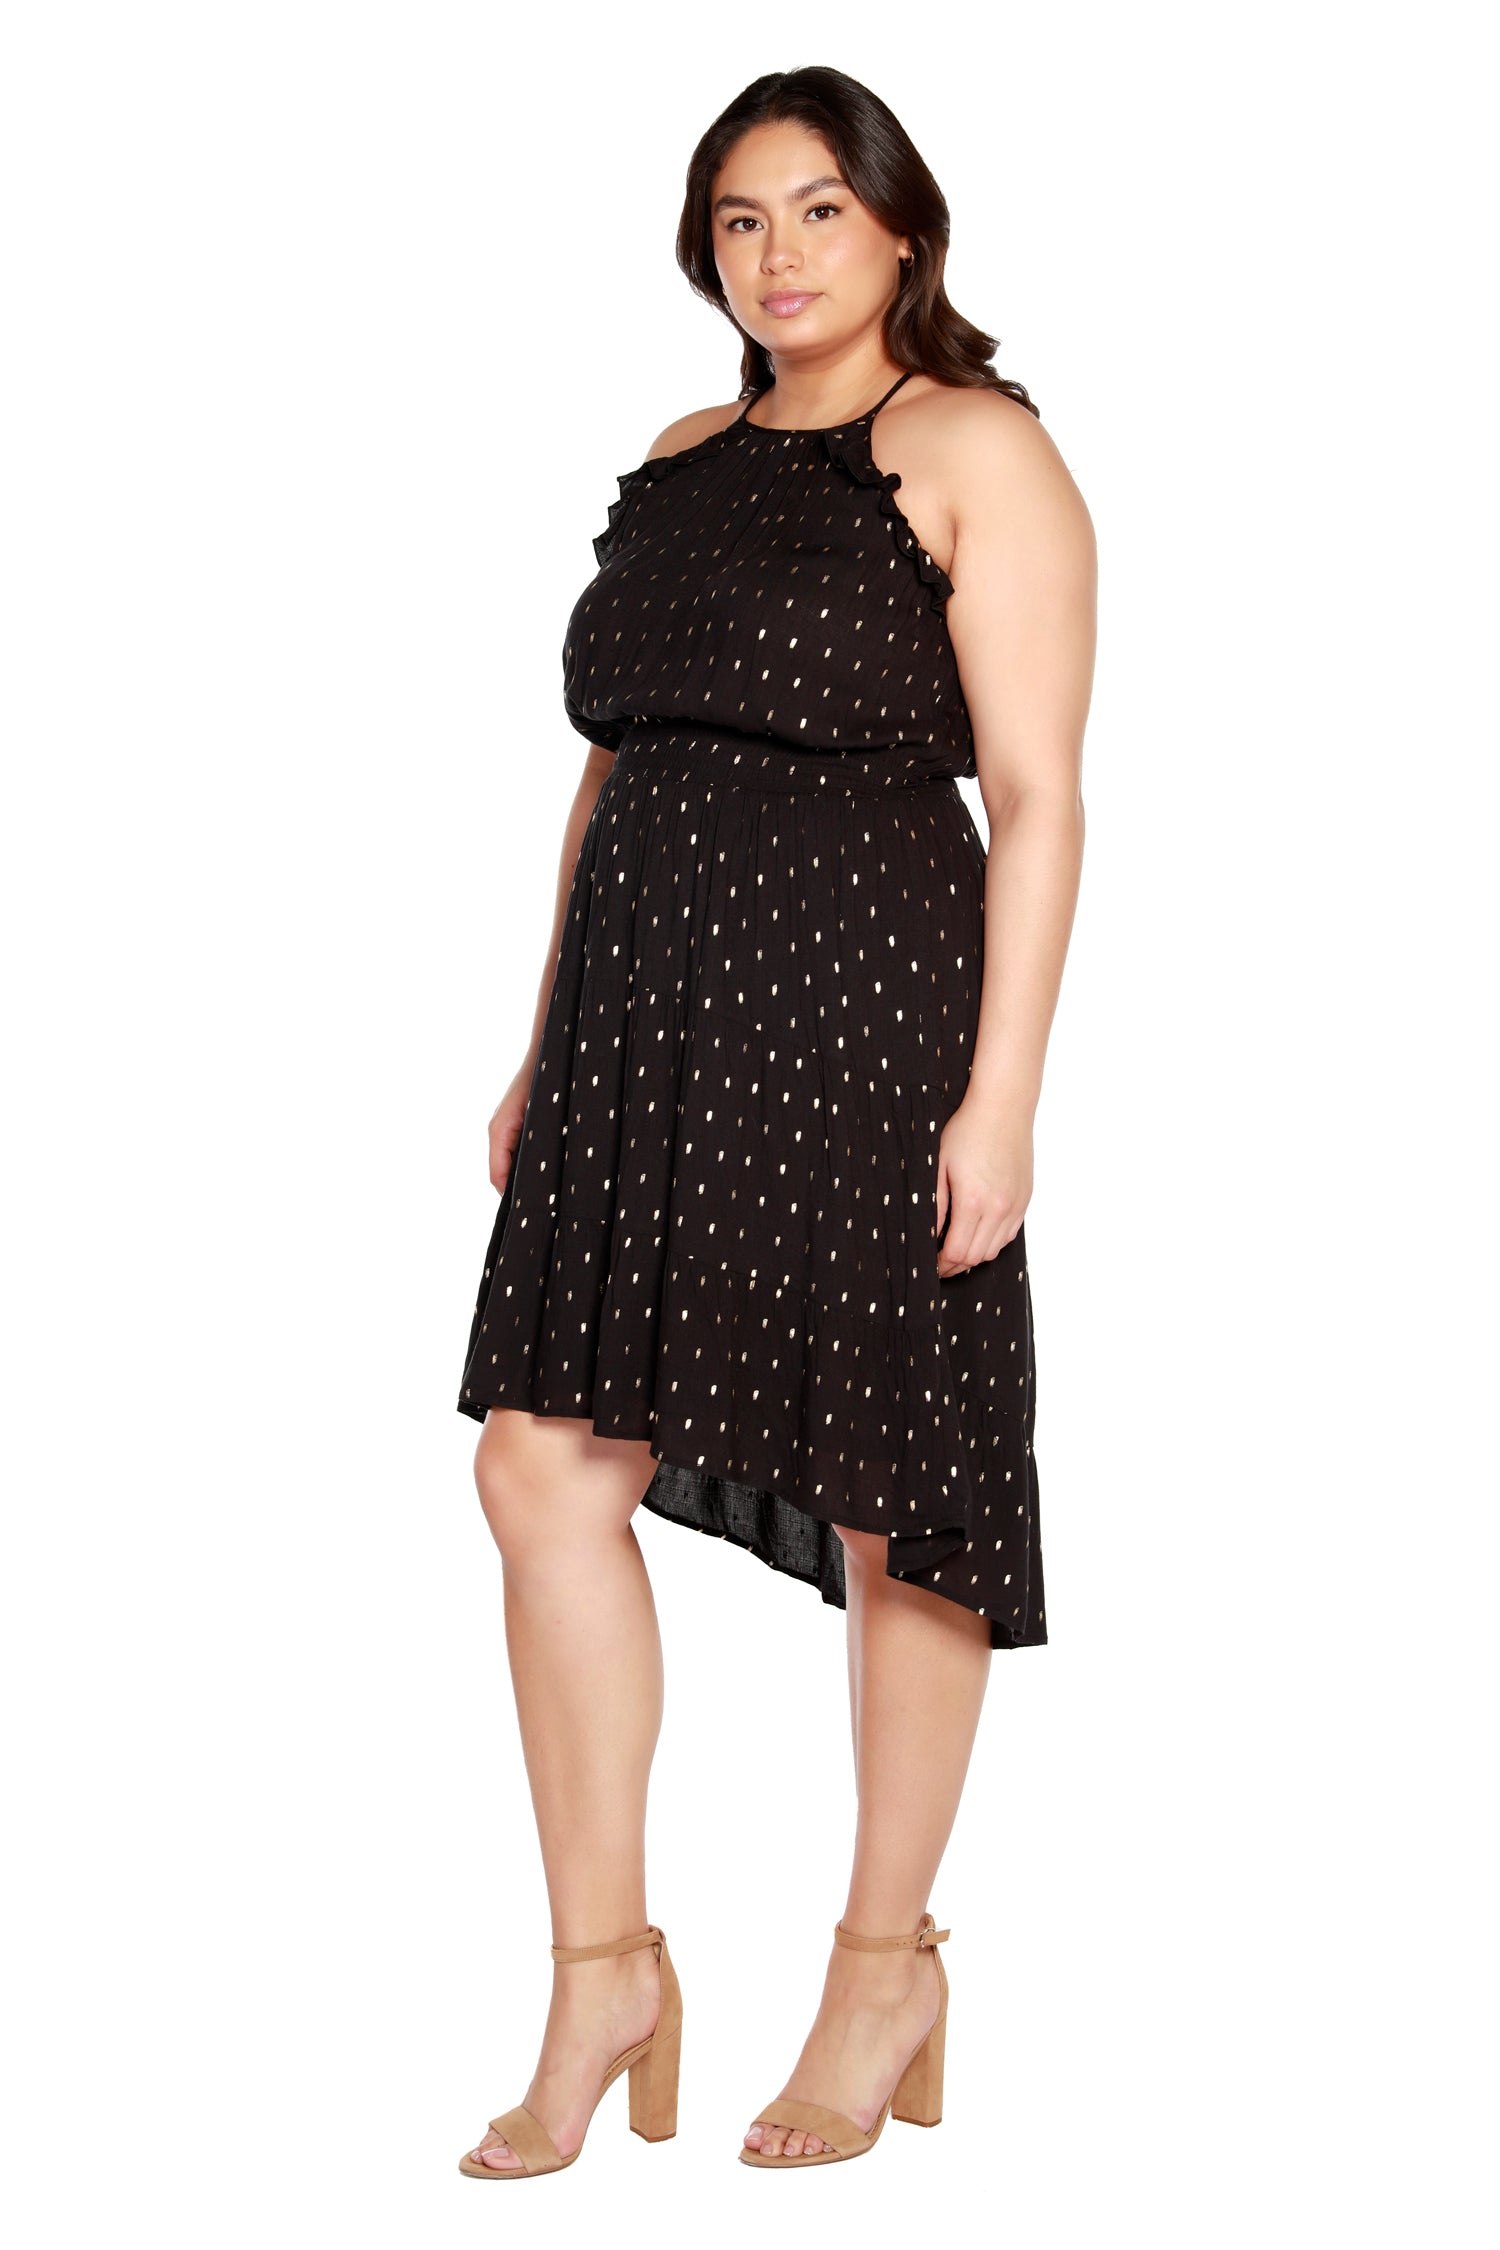 Women’s Sleeveless Dress with Tiered Skirt and High-Low Hem | Curvy